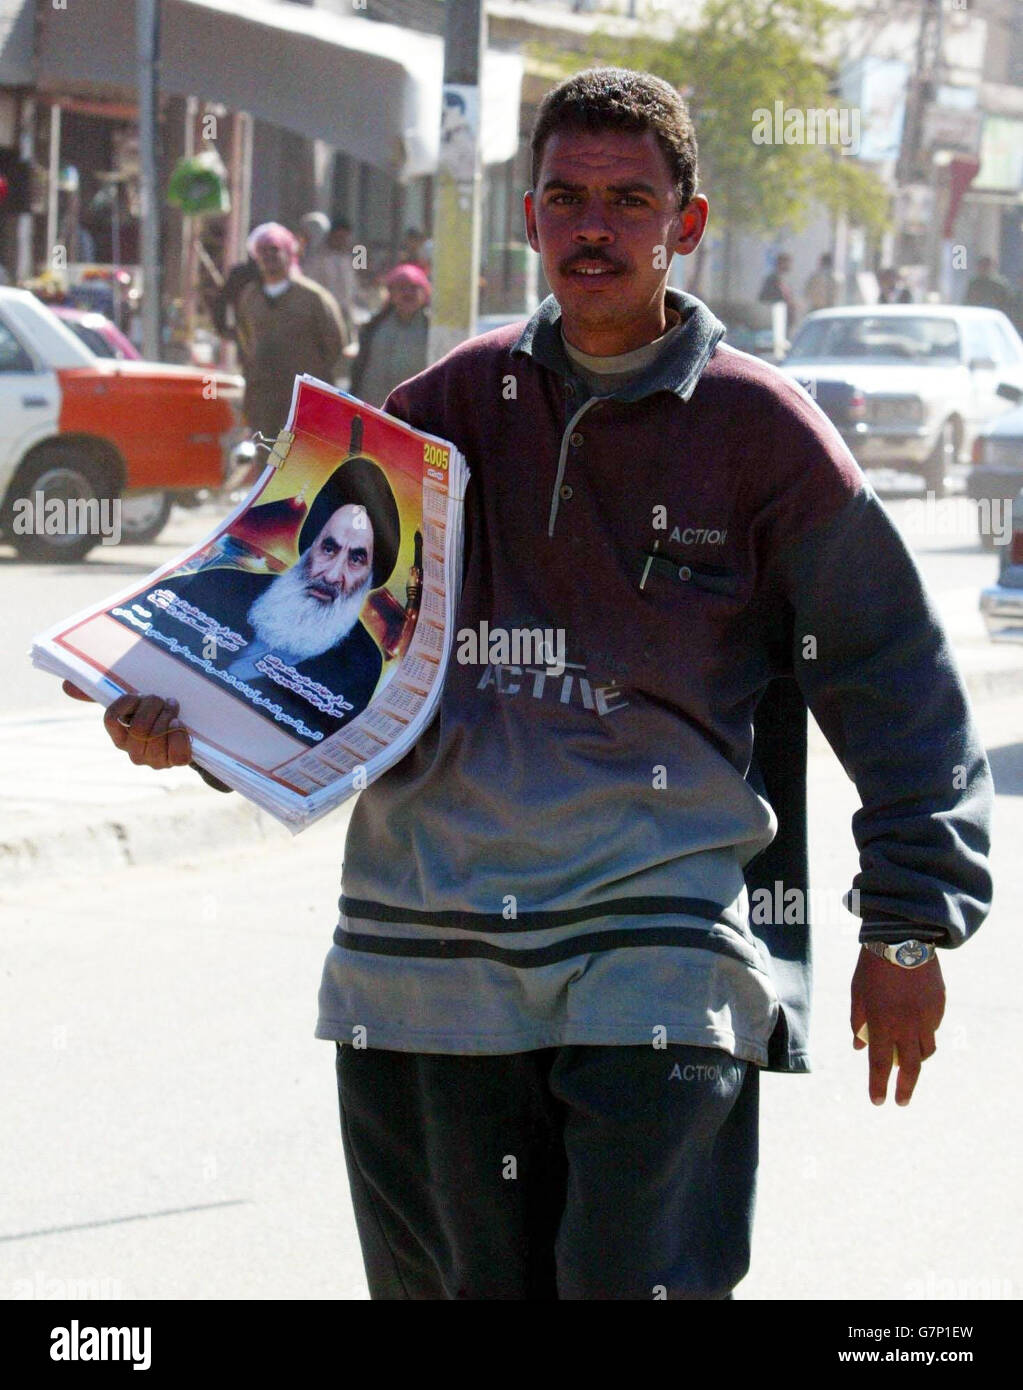 An Iraqi man campaigning on the streets of Az-Zubayr. Stock Photo